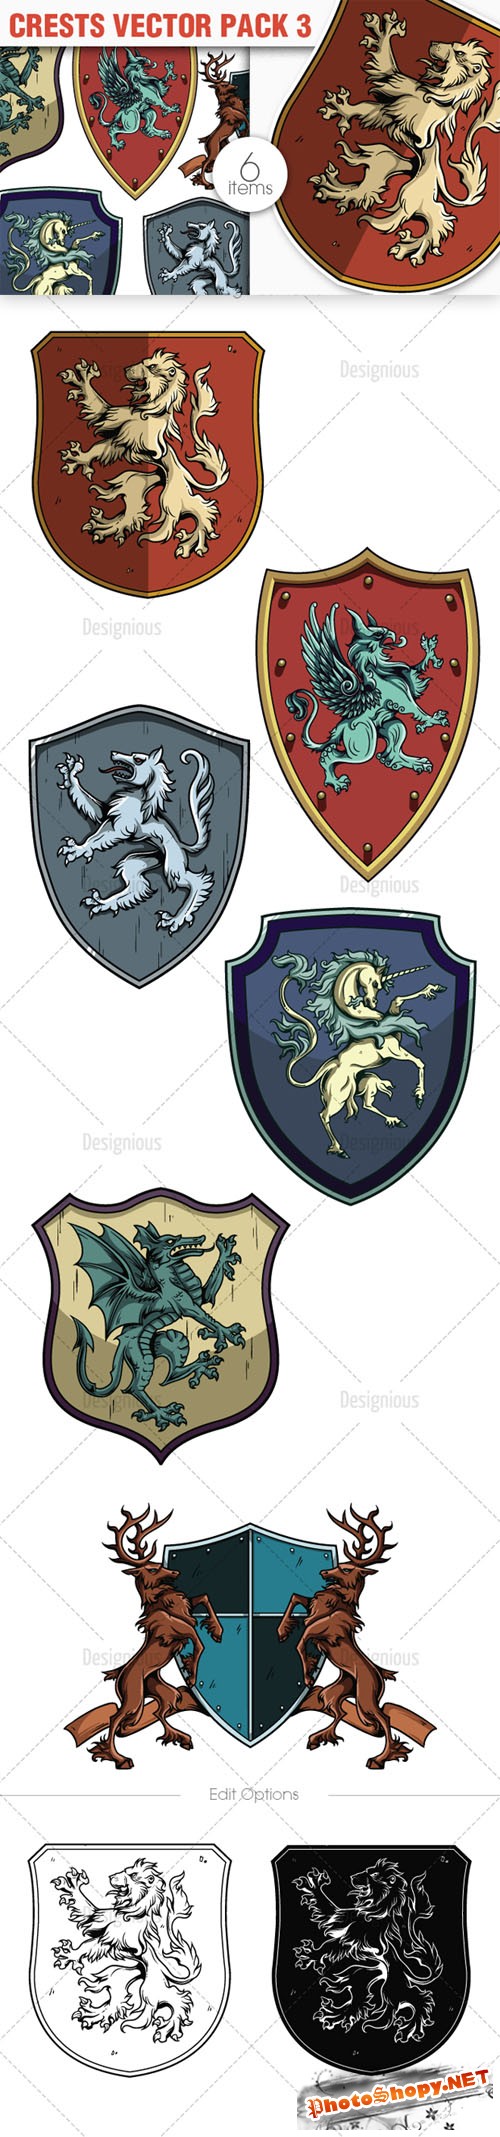 Crests Photoshop Vector Pack 3